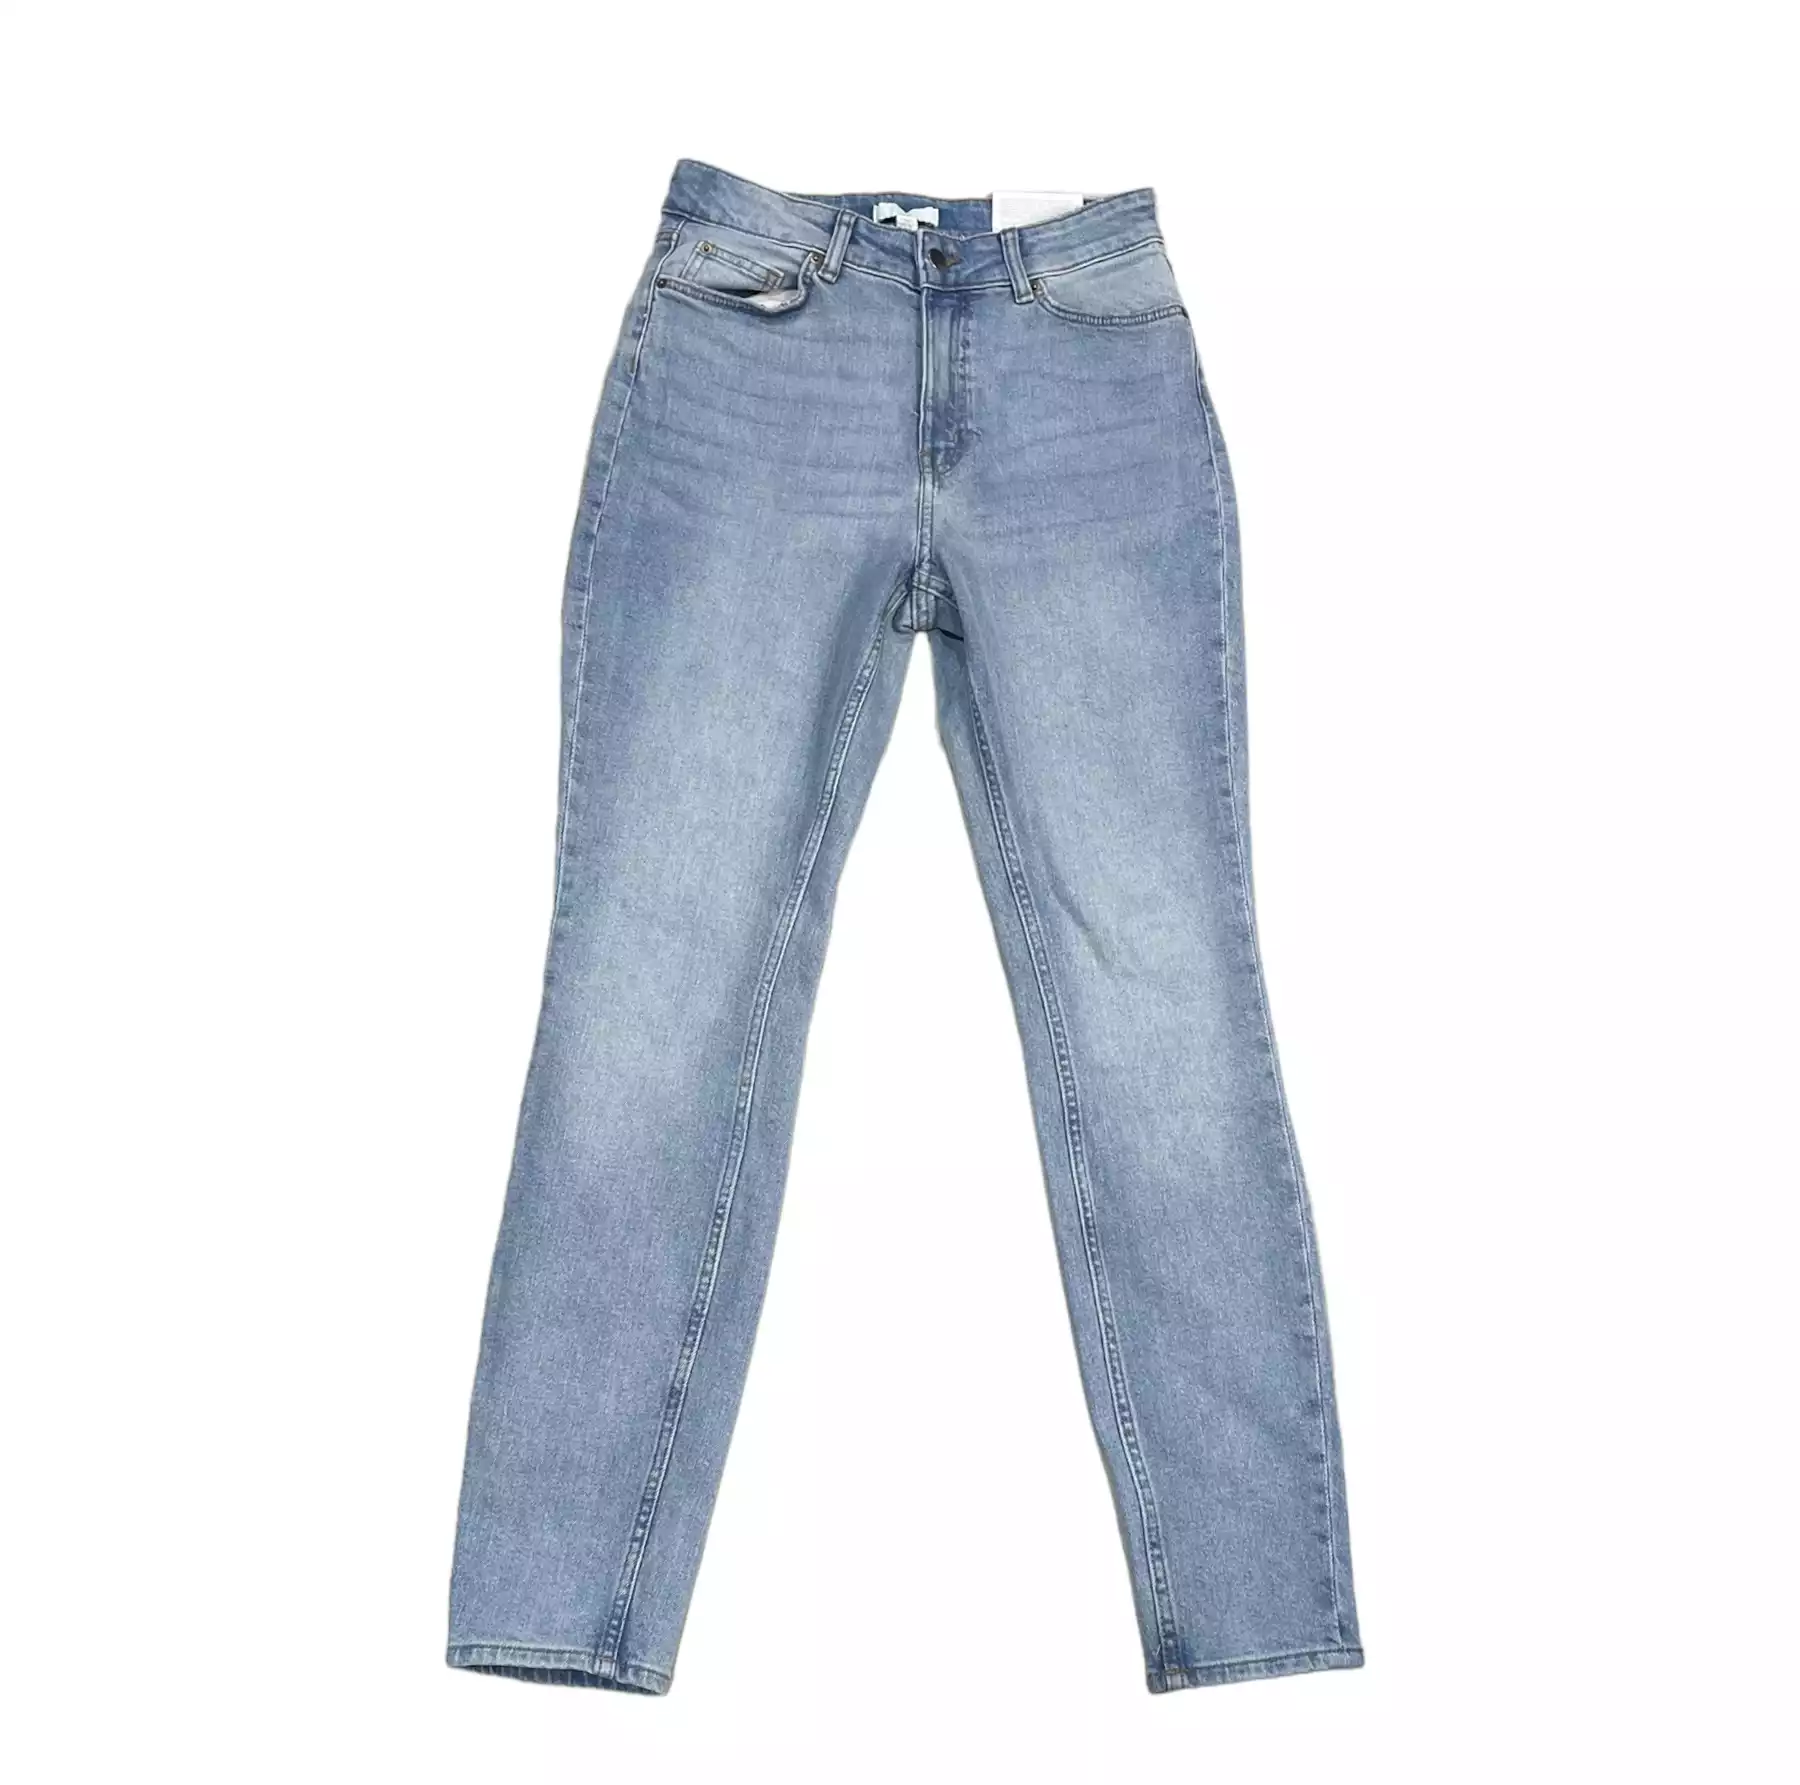 Denim Jeans by H&M